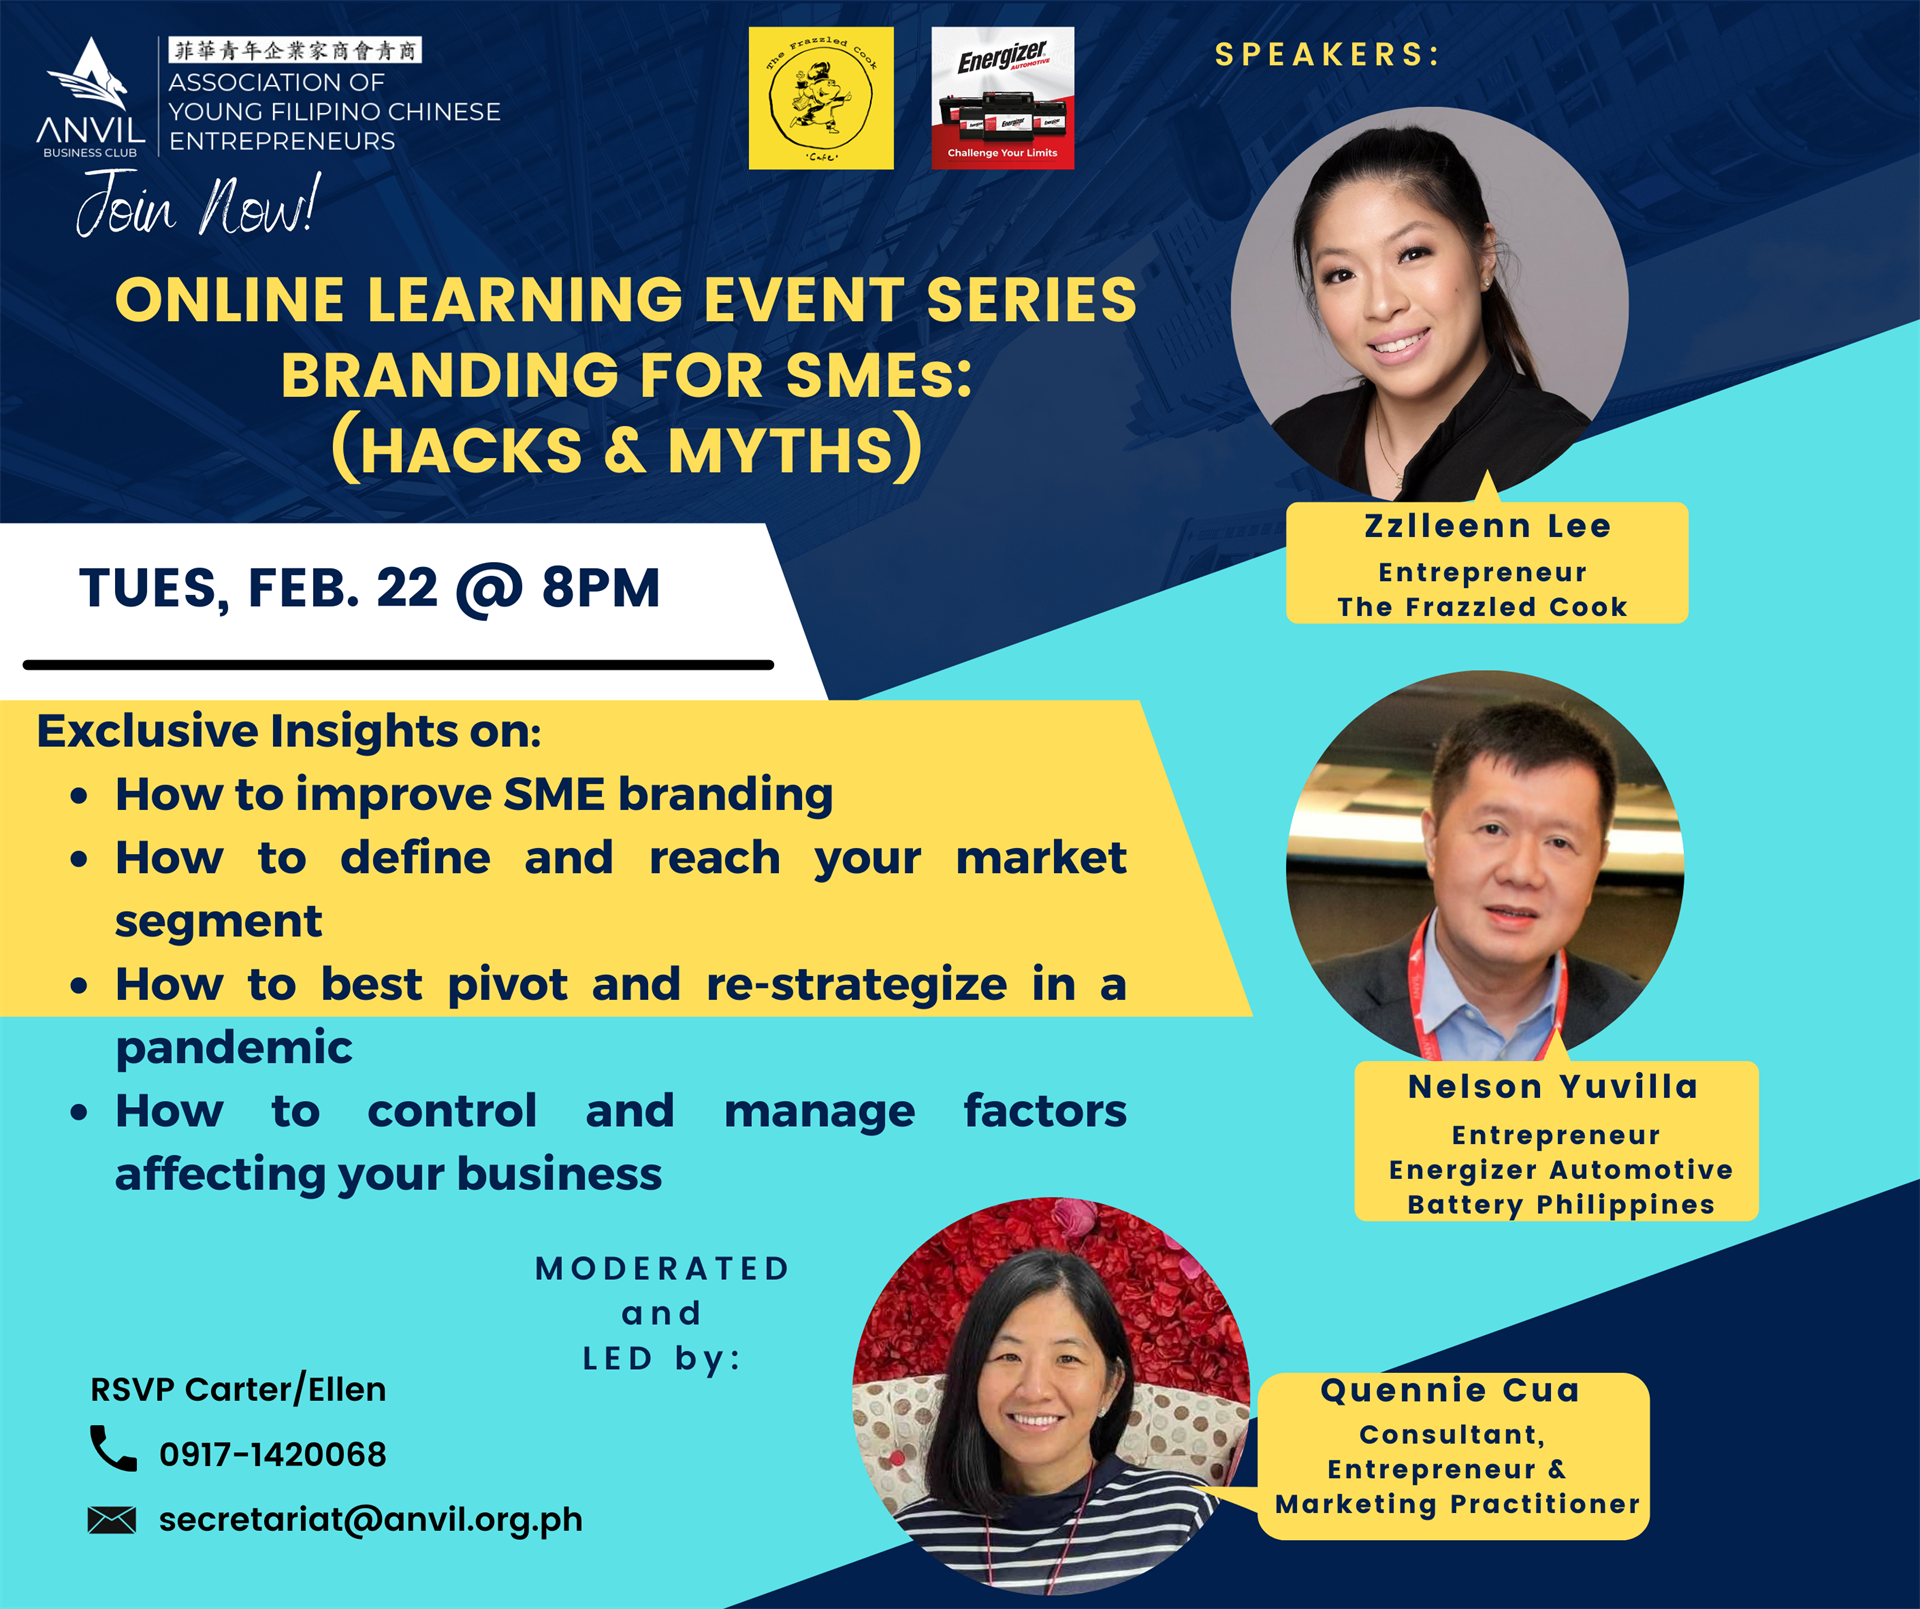 Online Learning Event Series Branding for SMEs